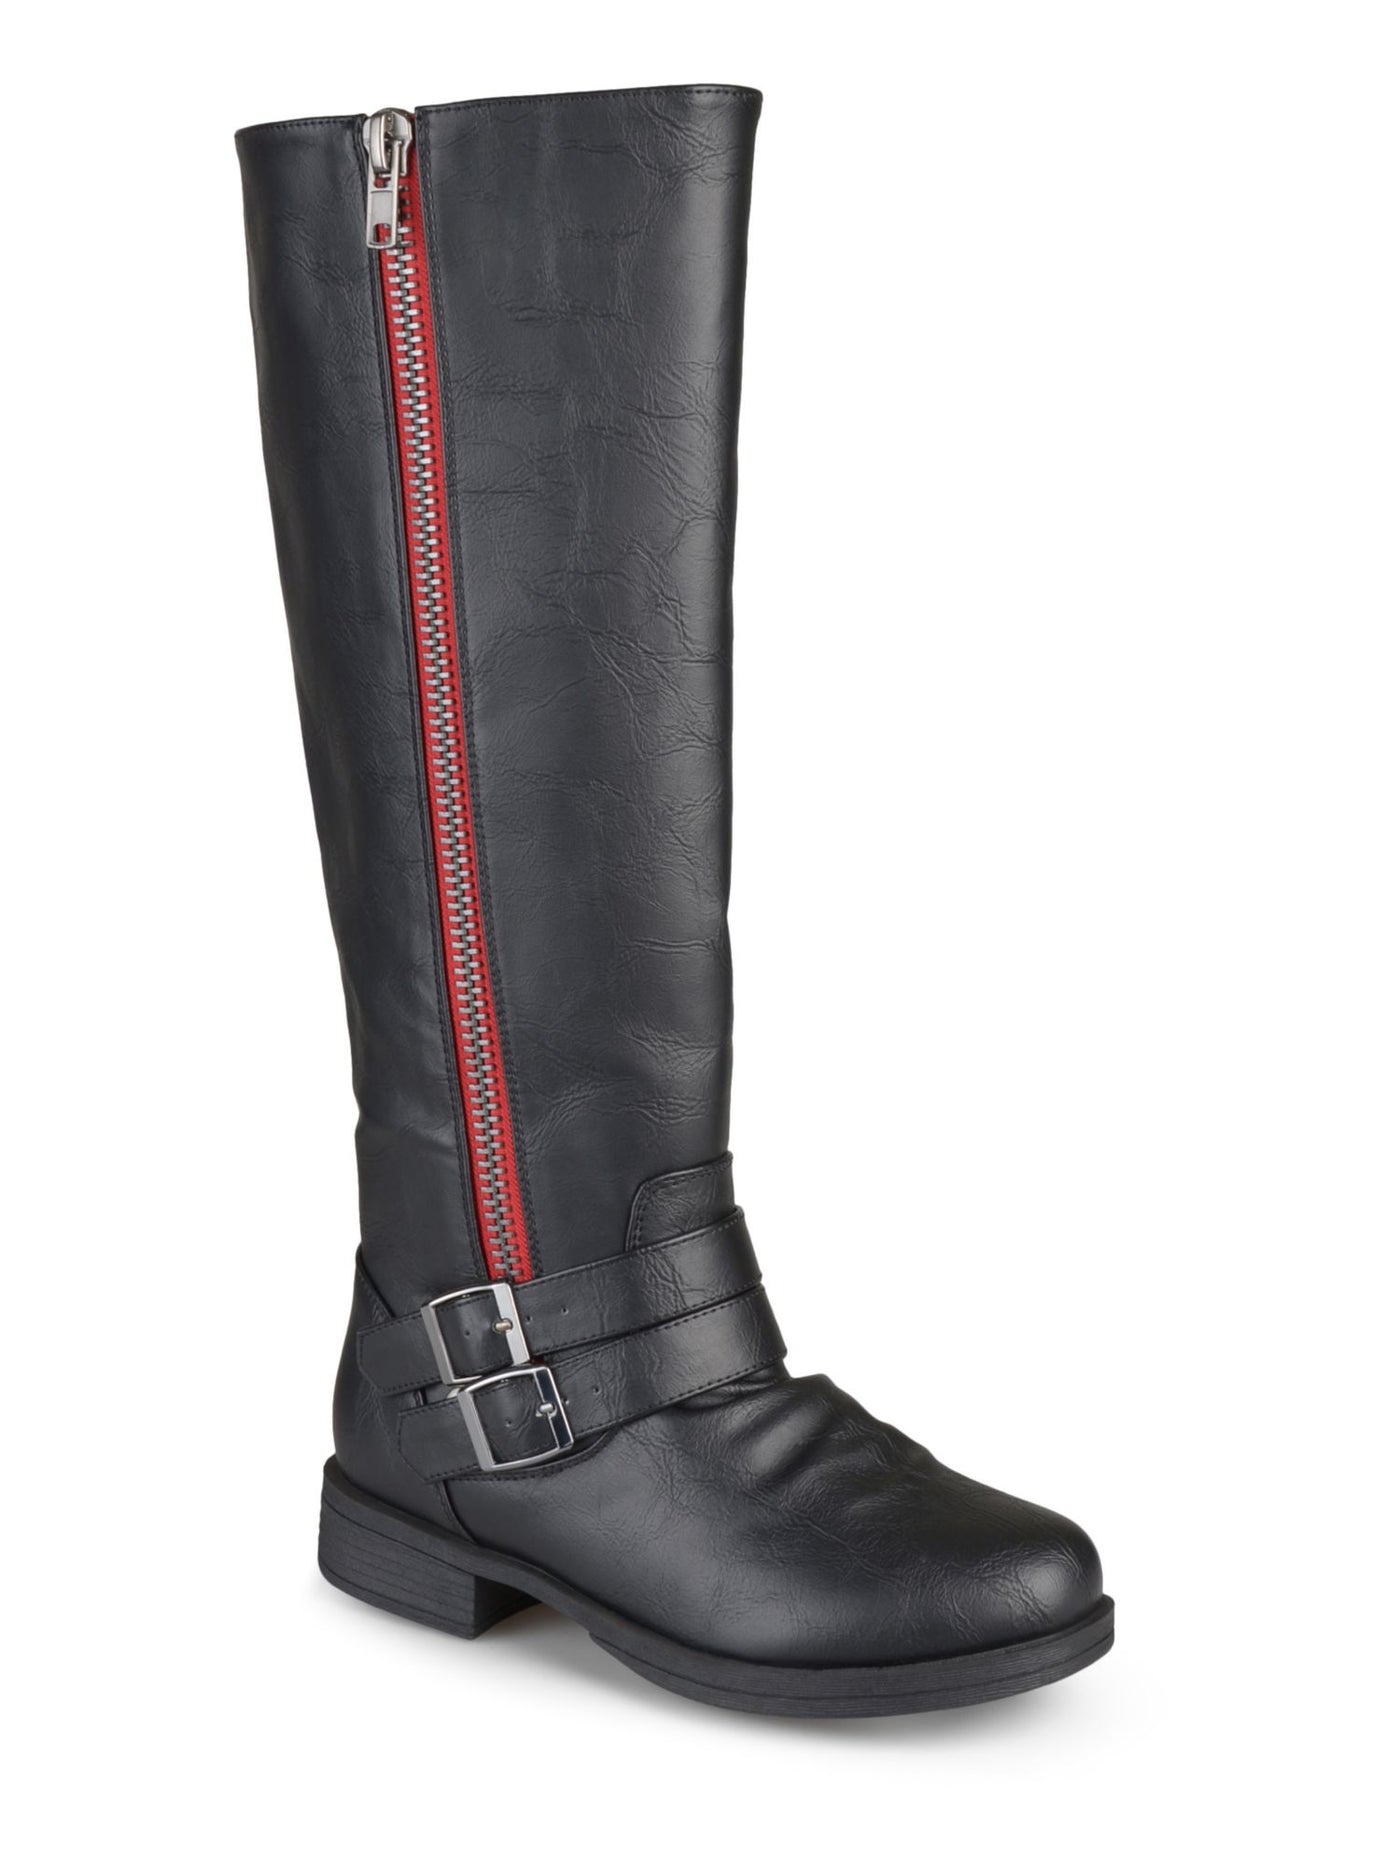 JOURNEE COLLECTION Womens Black Buckle Accent Lady Round Toe Block Heel Zip-Up Riding Boot 8